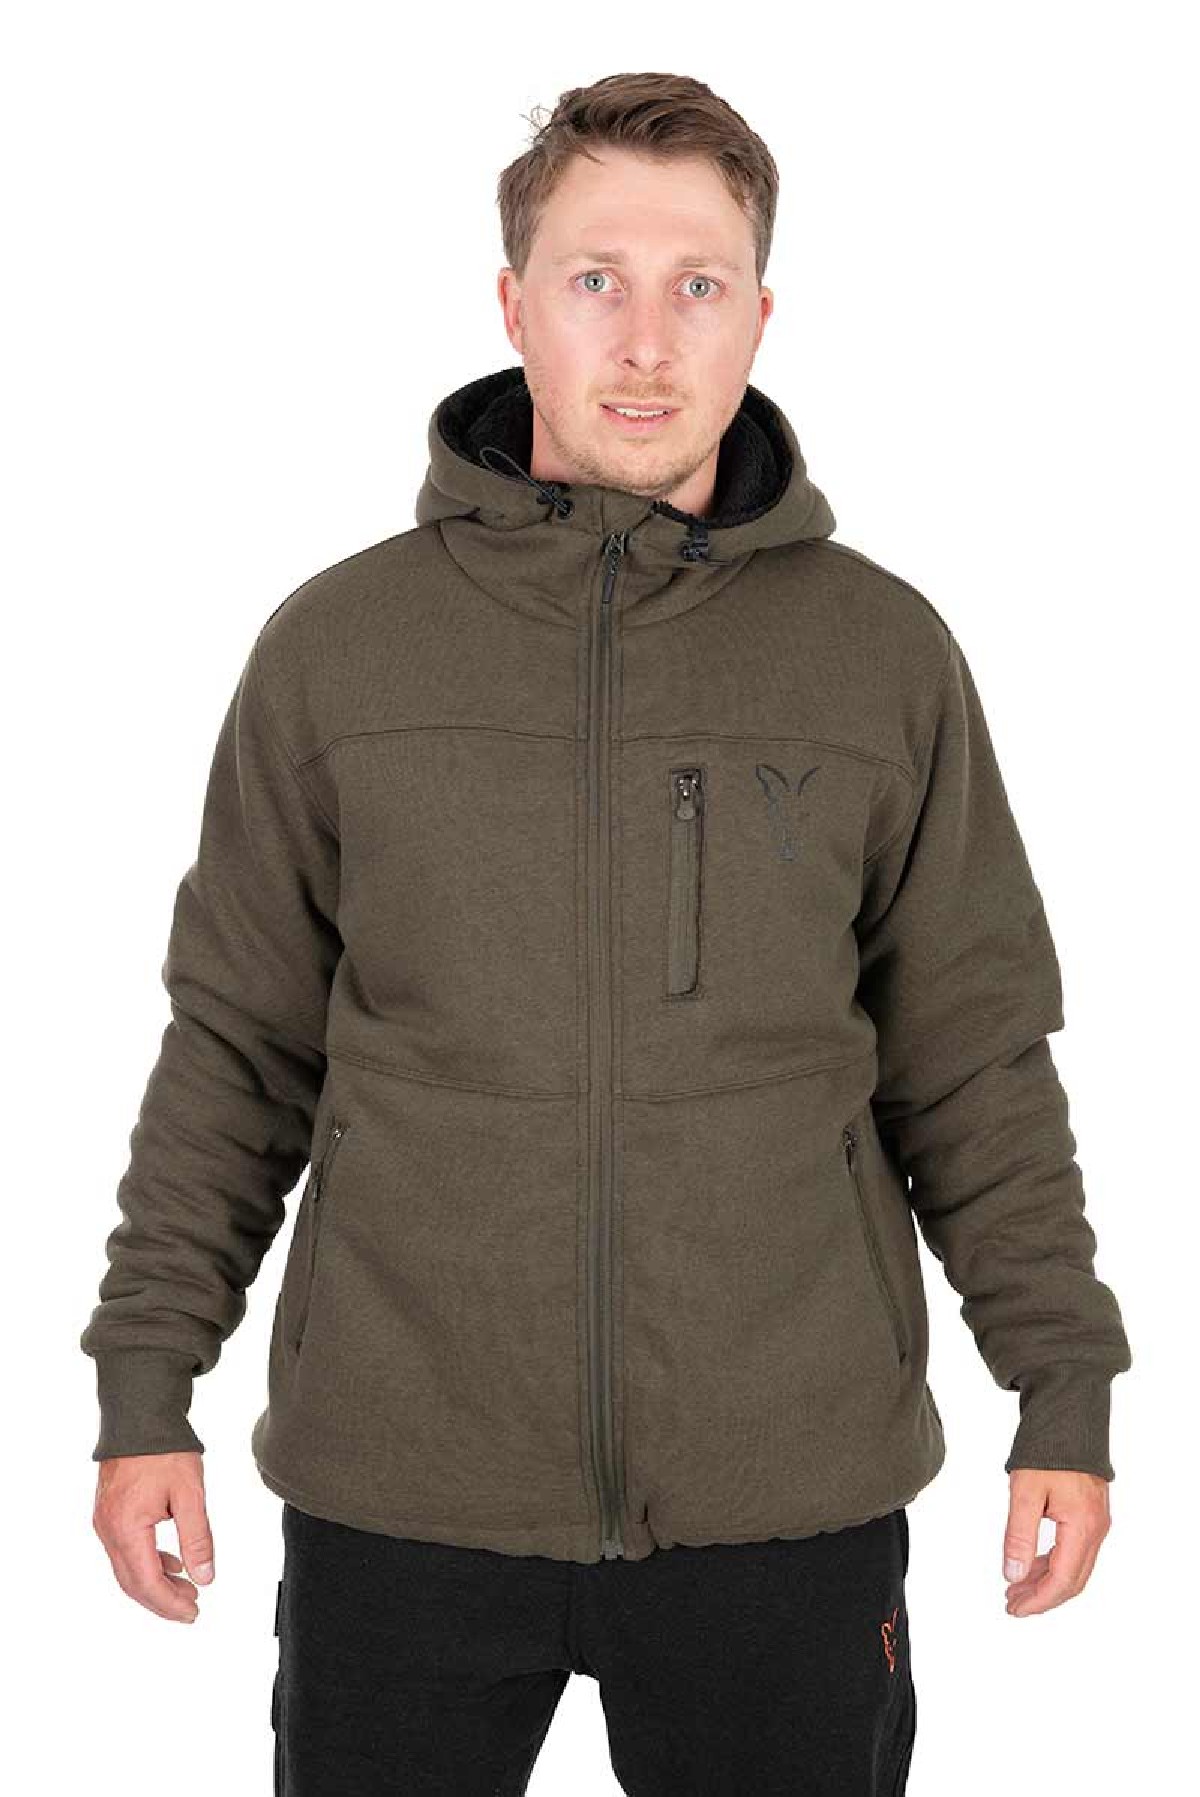 Fox Collection Sherpa Jacket Green & Black XX-Large